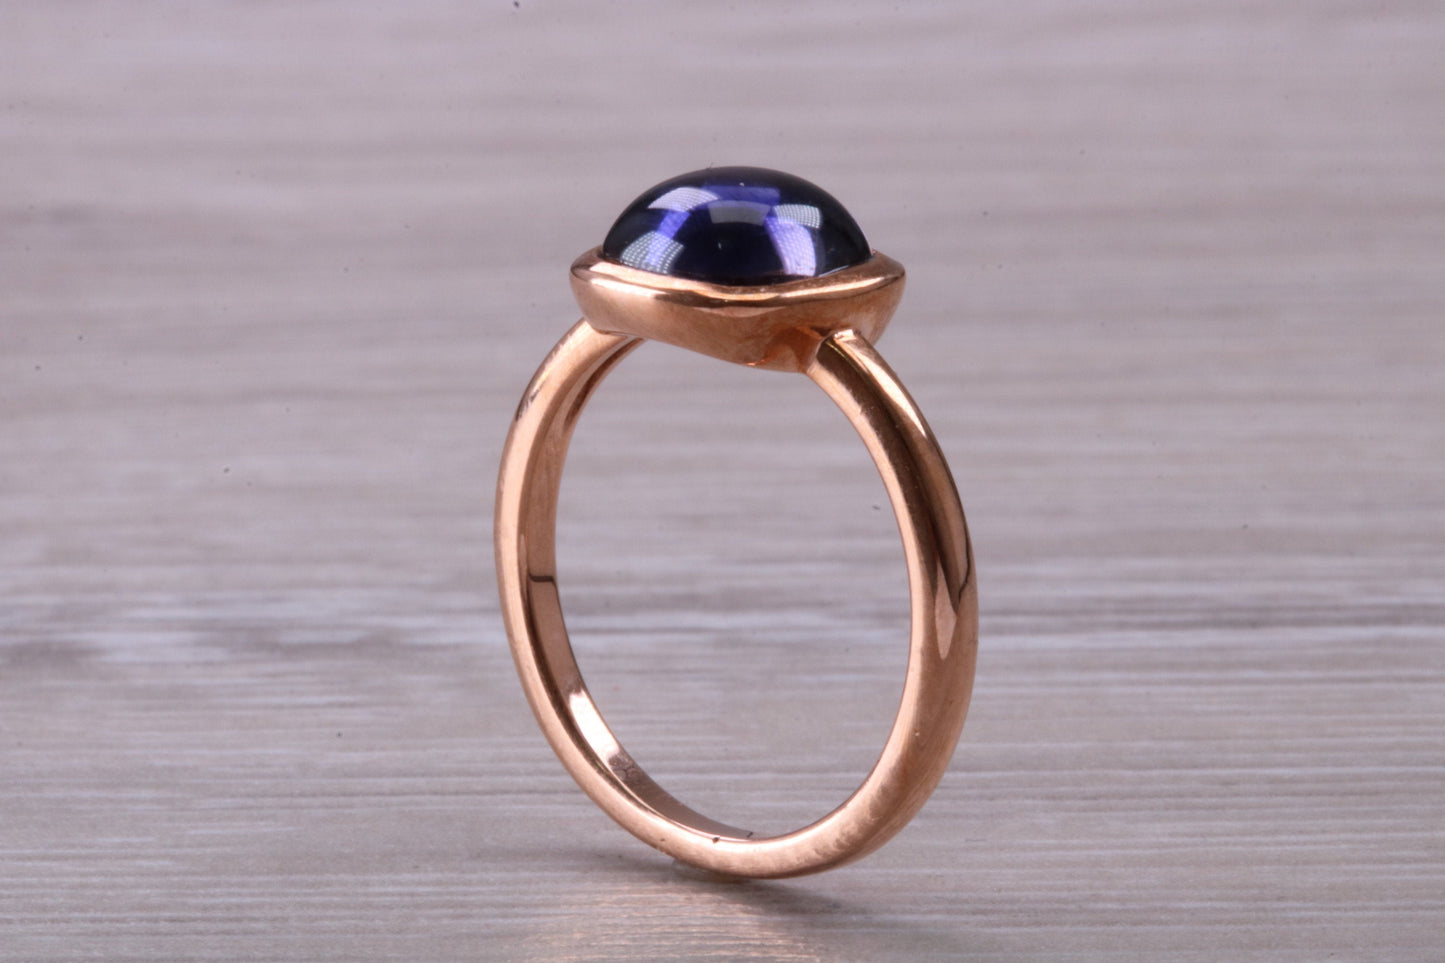 Beautiful Cabochon cut Iolite ring, solid chunky ring, made from solid 9ct Rose Gold, British hallmarked, natural Iolite